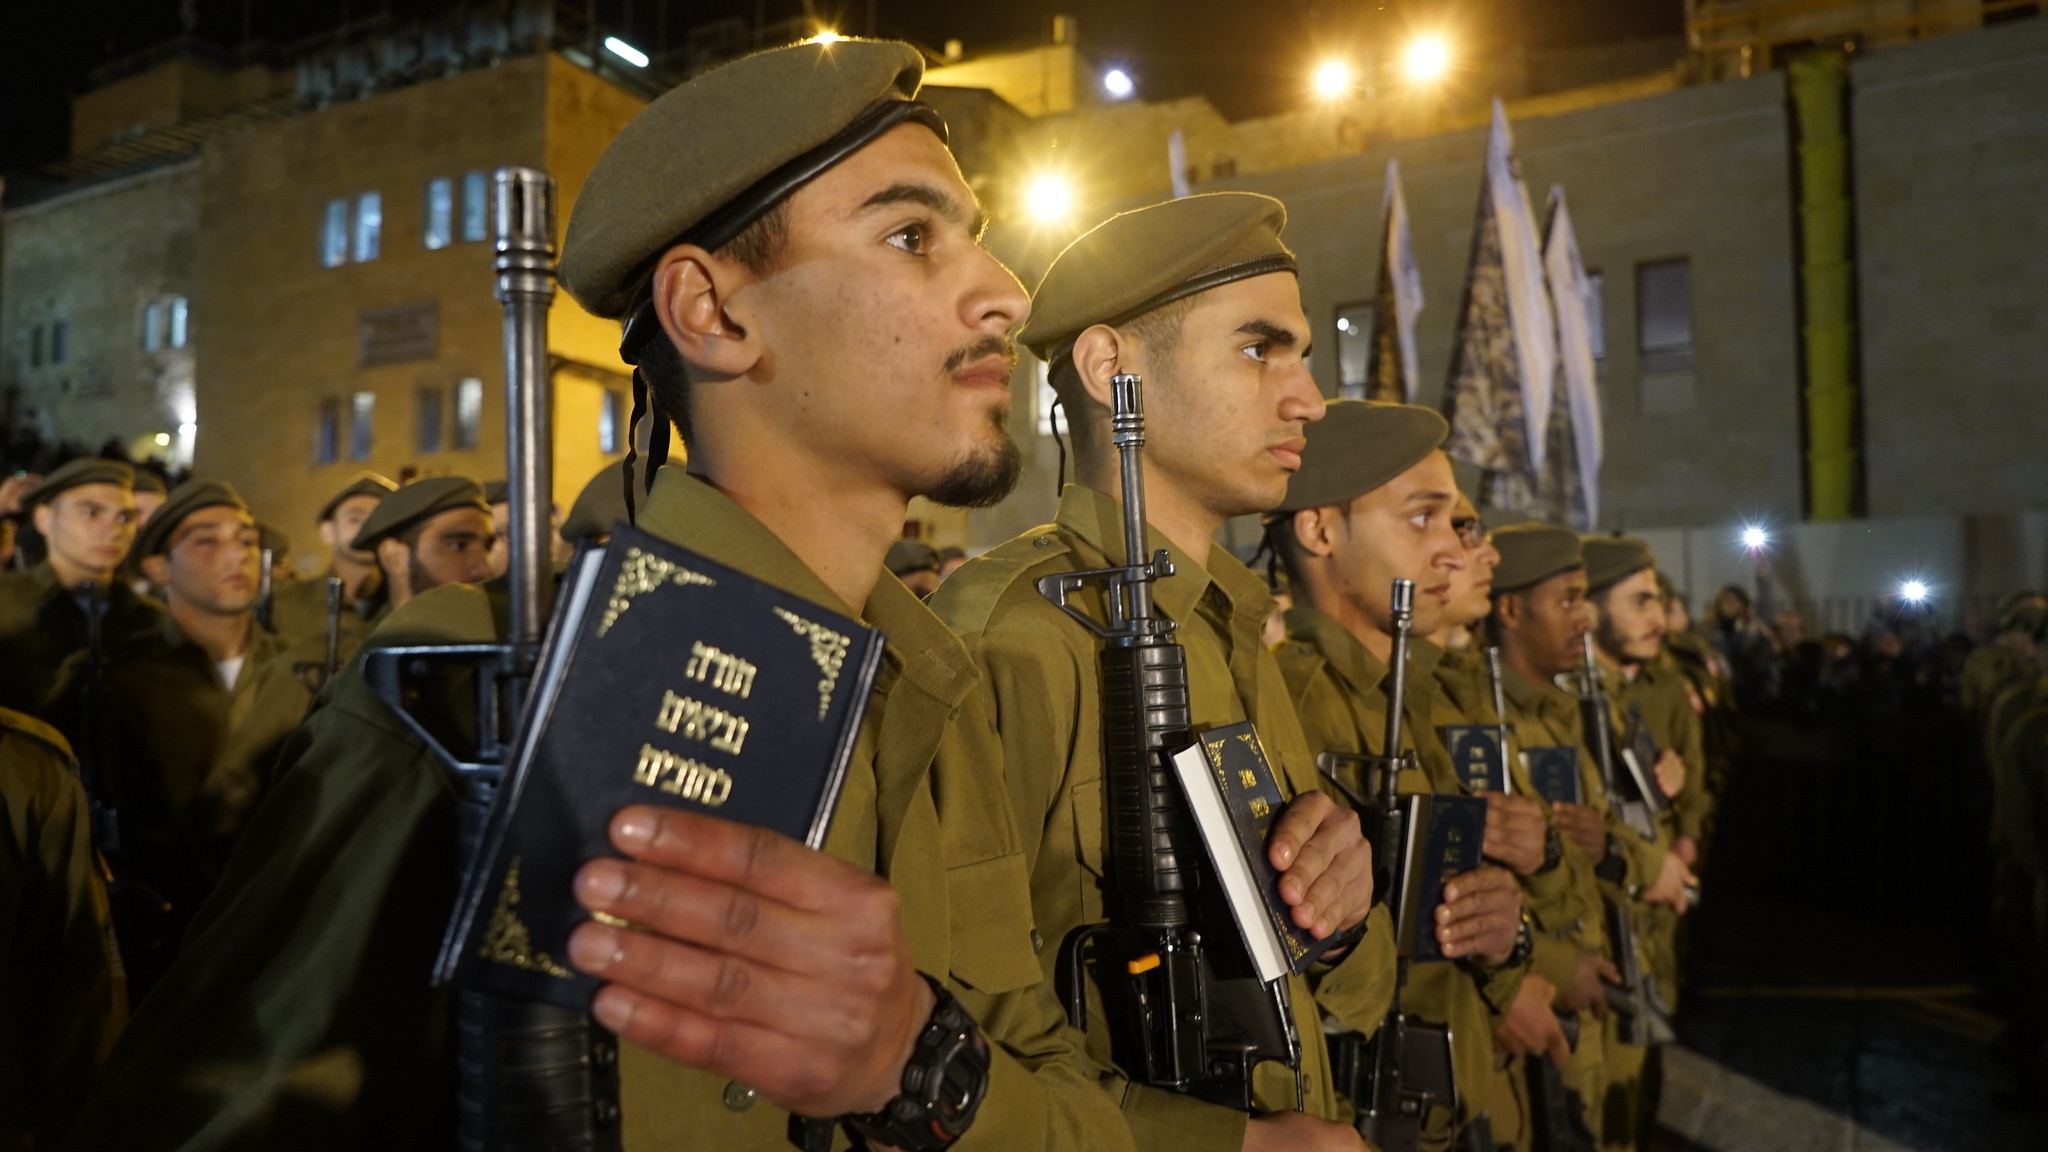 West Point professor on Israel military: simply unprepared for Hamas attack